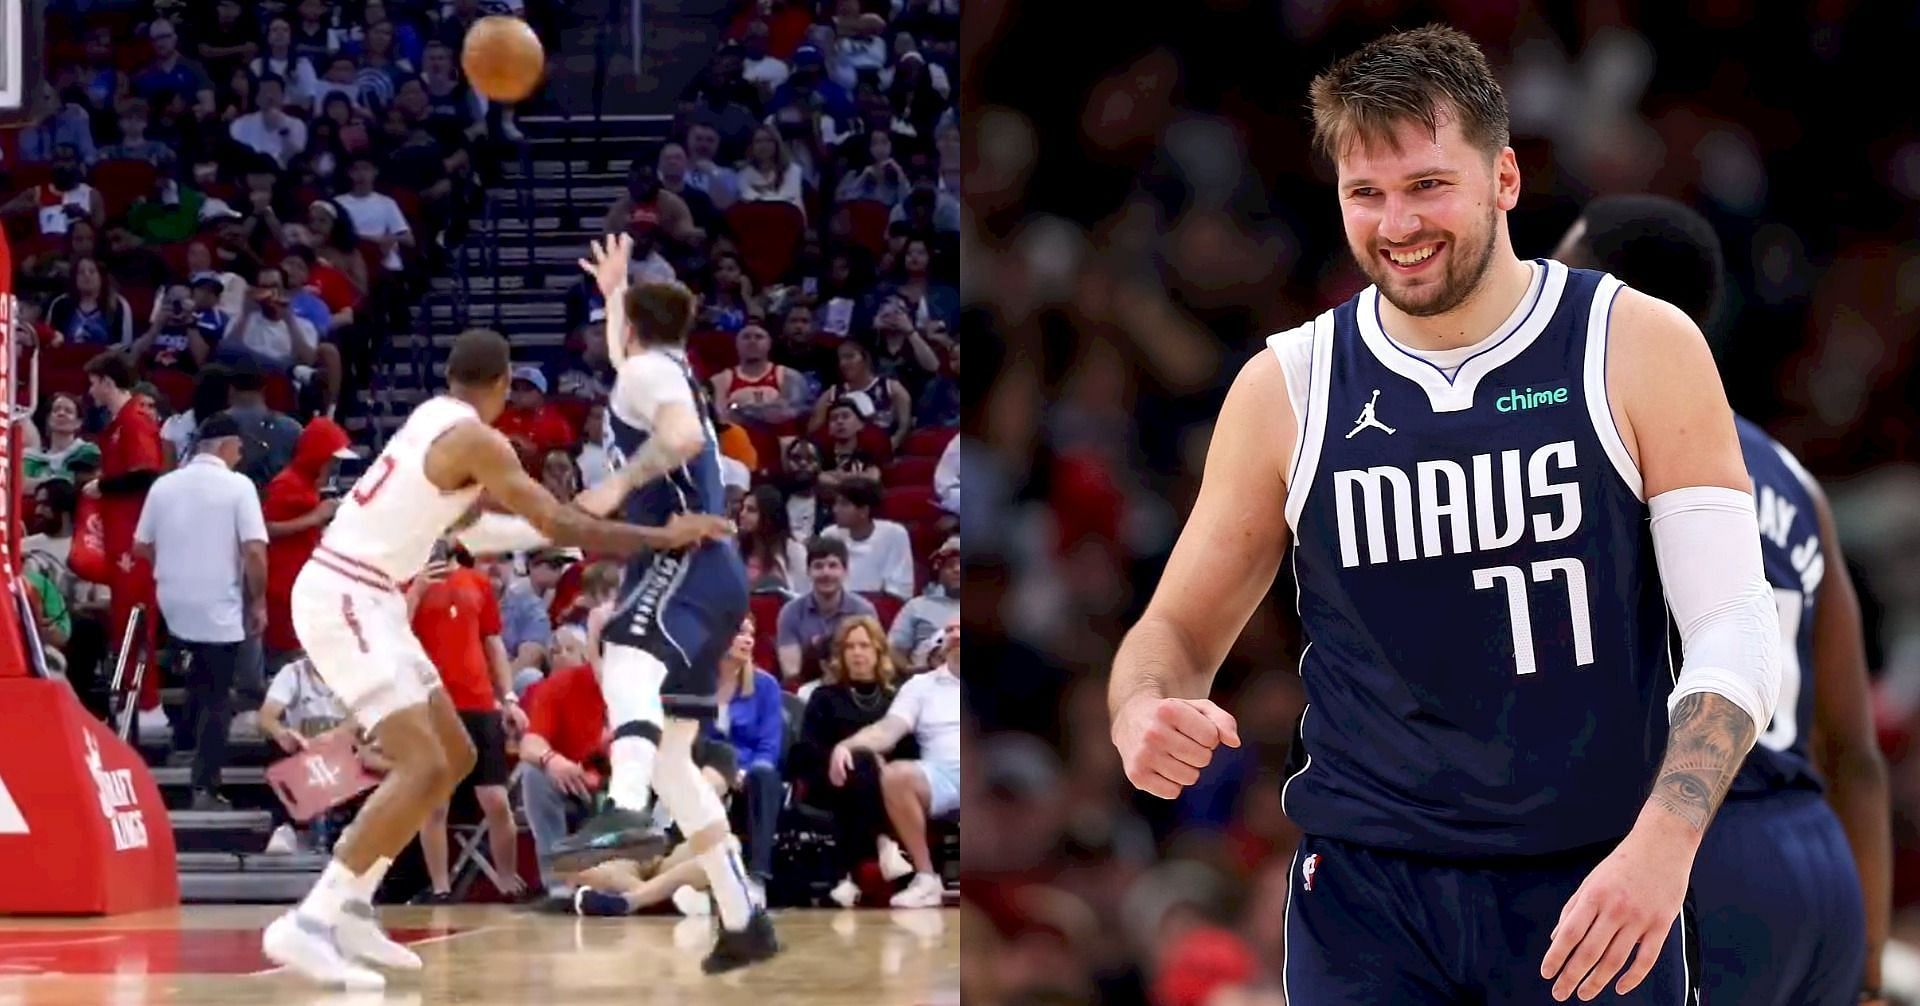 Luka Doncic toys with Rockets forward, sinks circus shot for 37th point in 3rd quarter